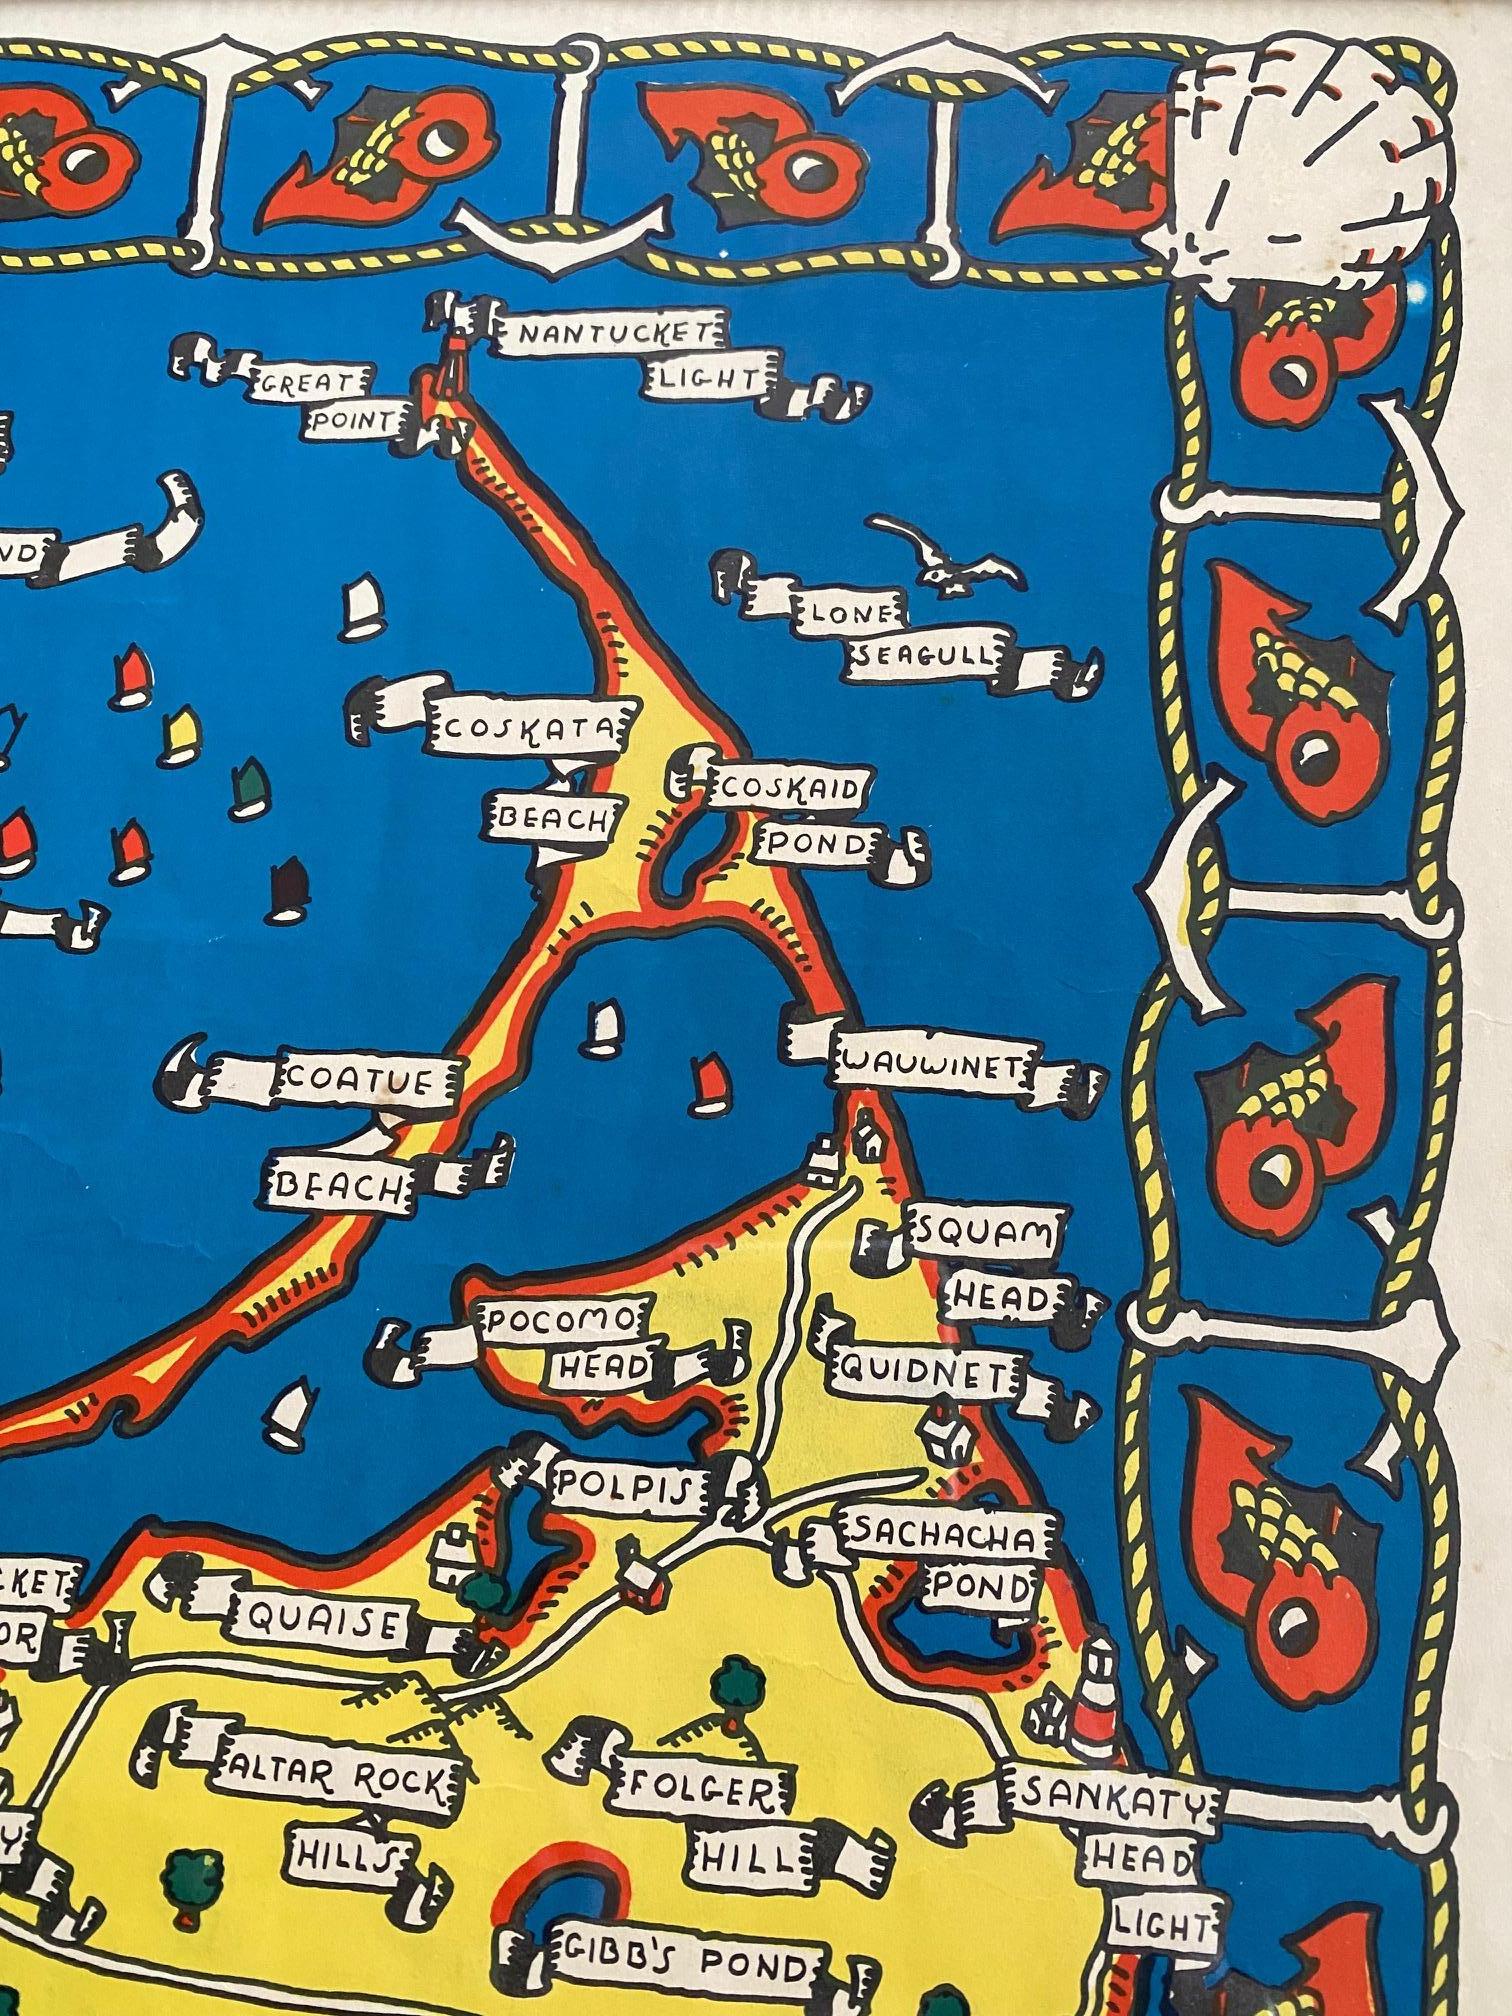 Modern Whimsical Decorative Map of Nantucket by Jack Atherton, 1937